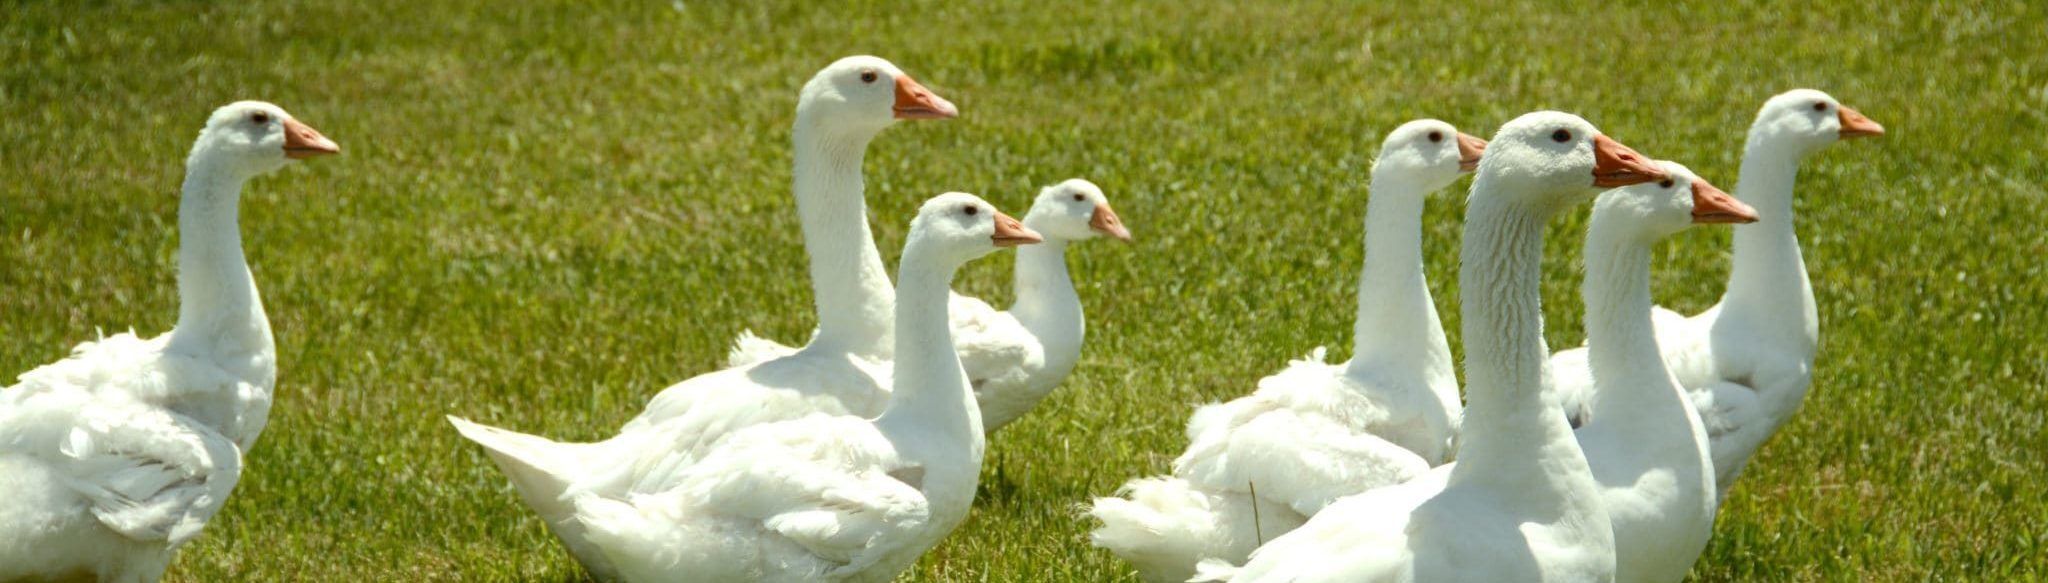 Group of white geese.